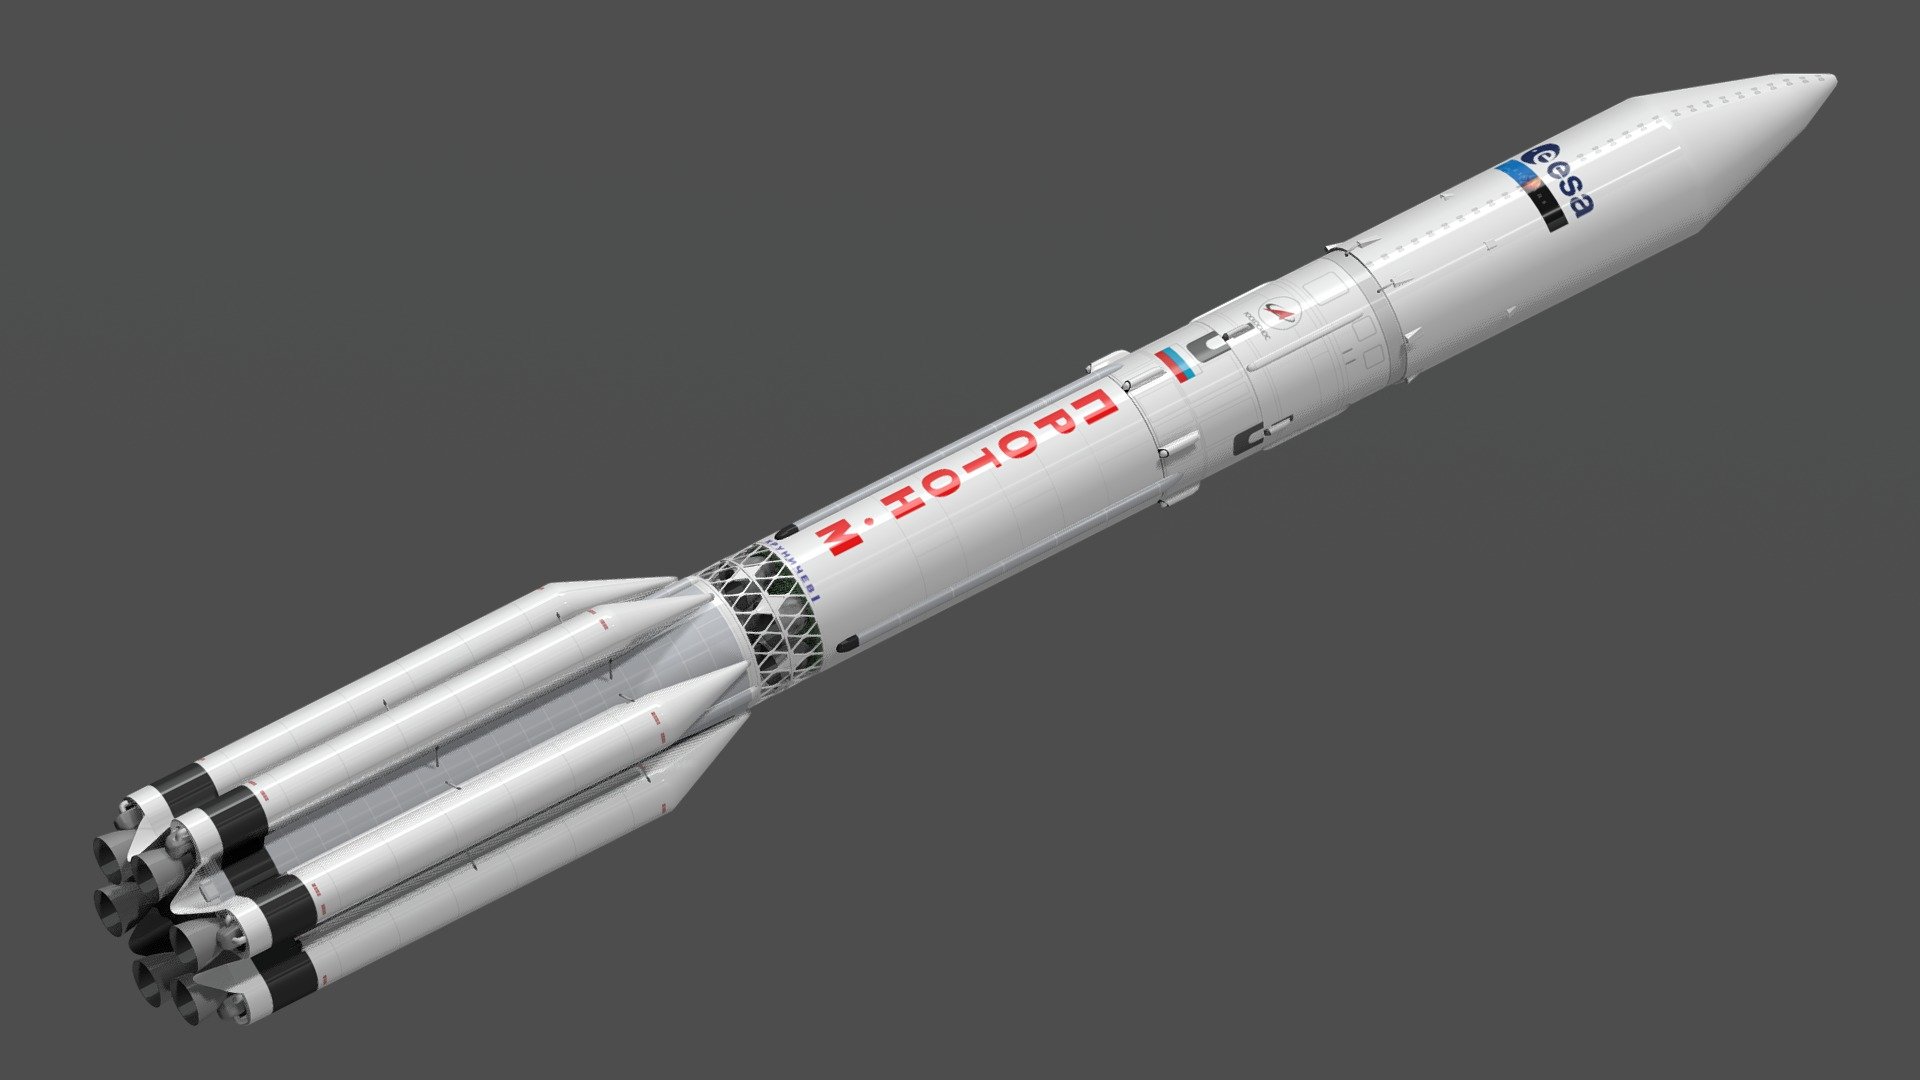 Sovet/Russian spache launch vehicle. Modelled and textured by @EGPJET3D 3d model